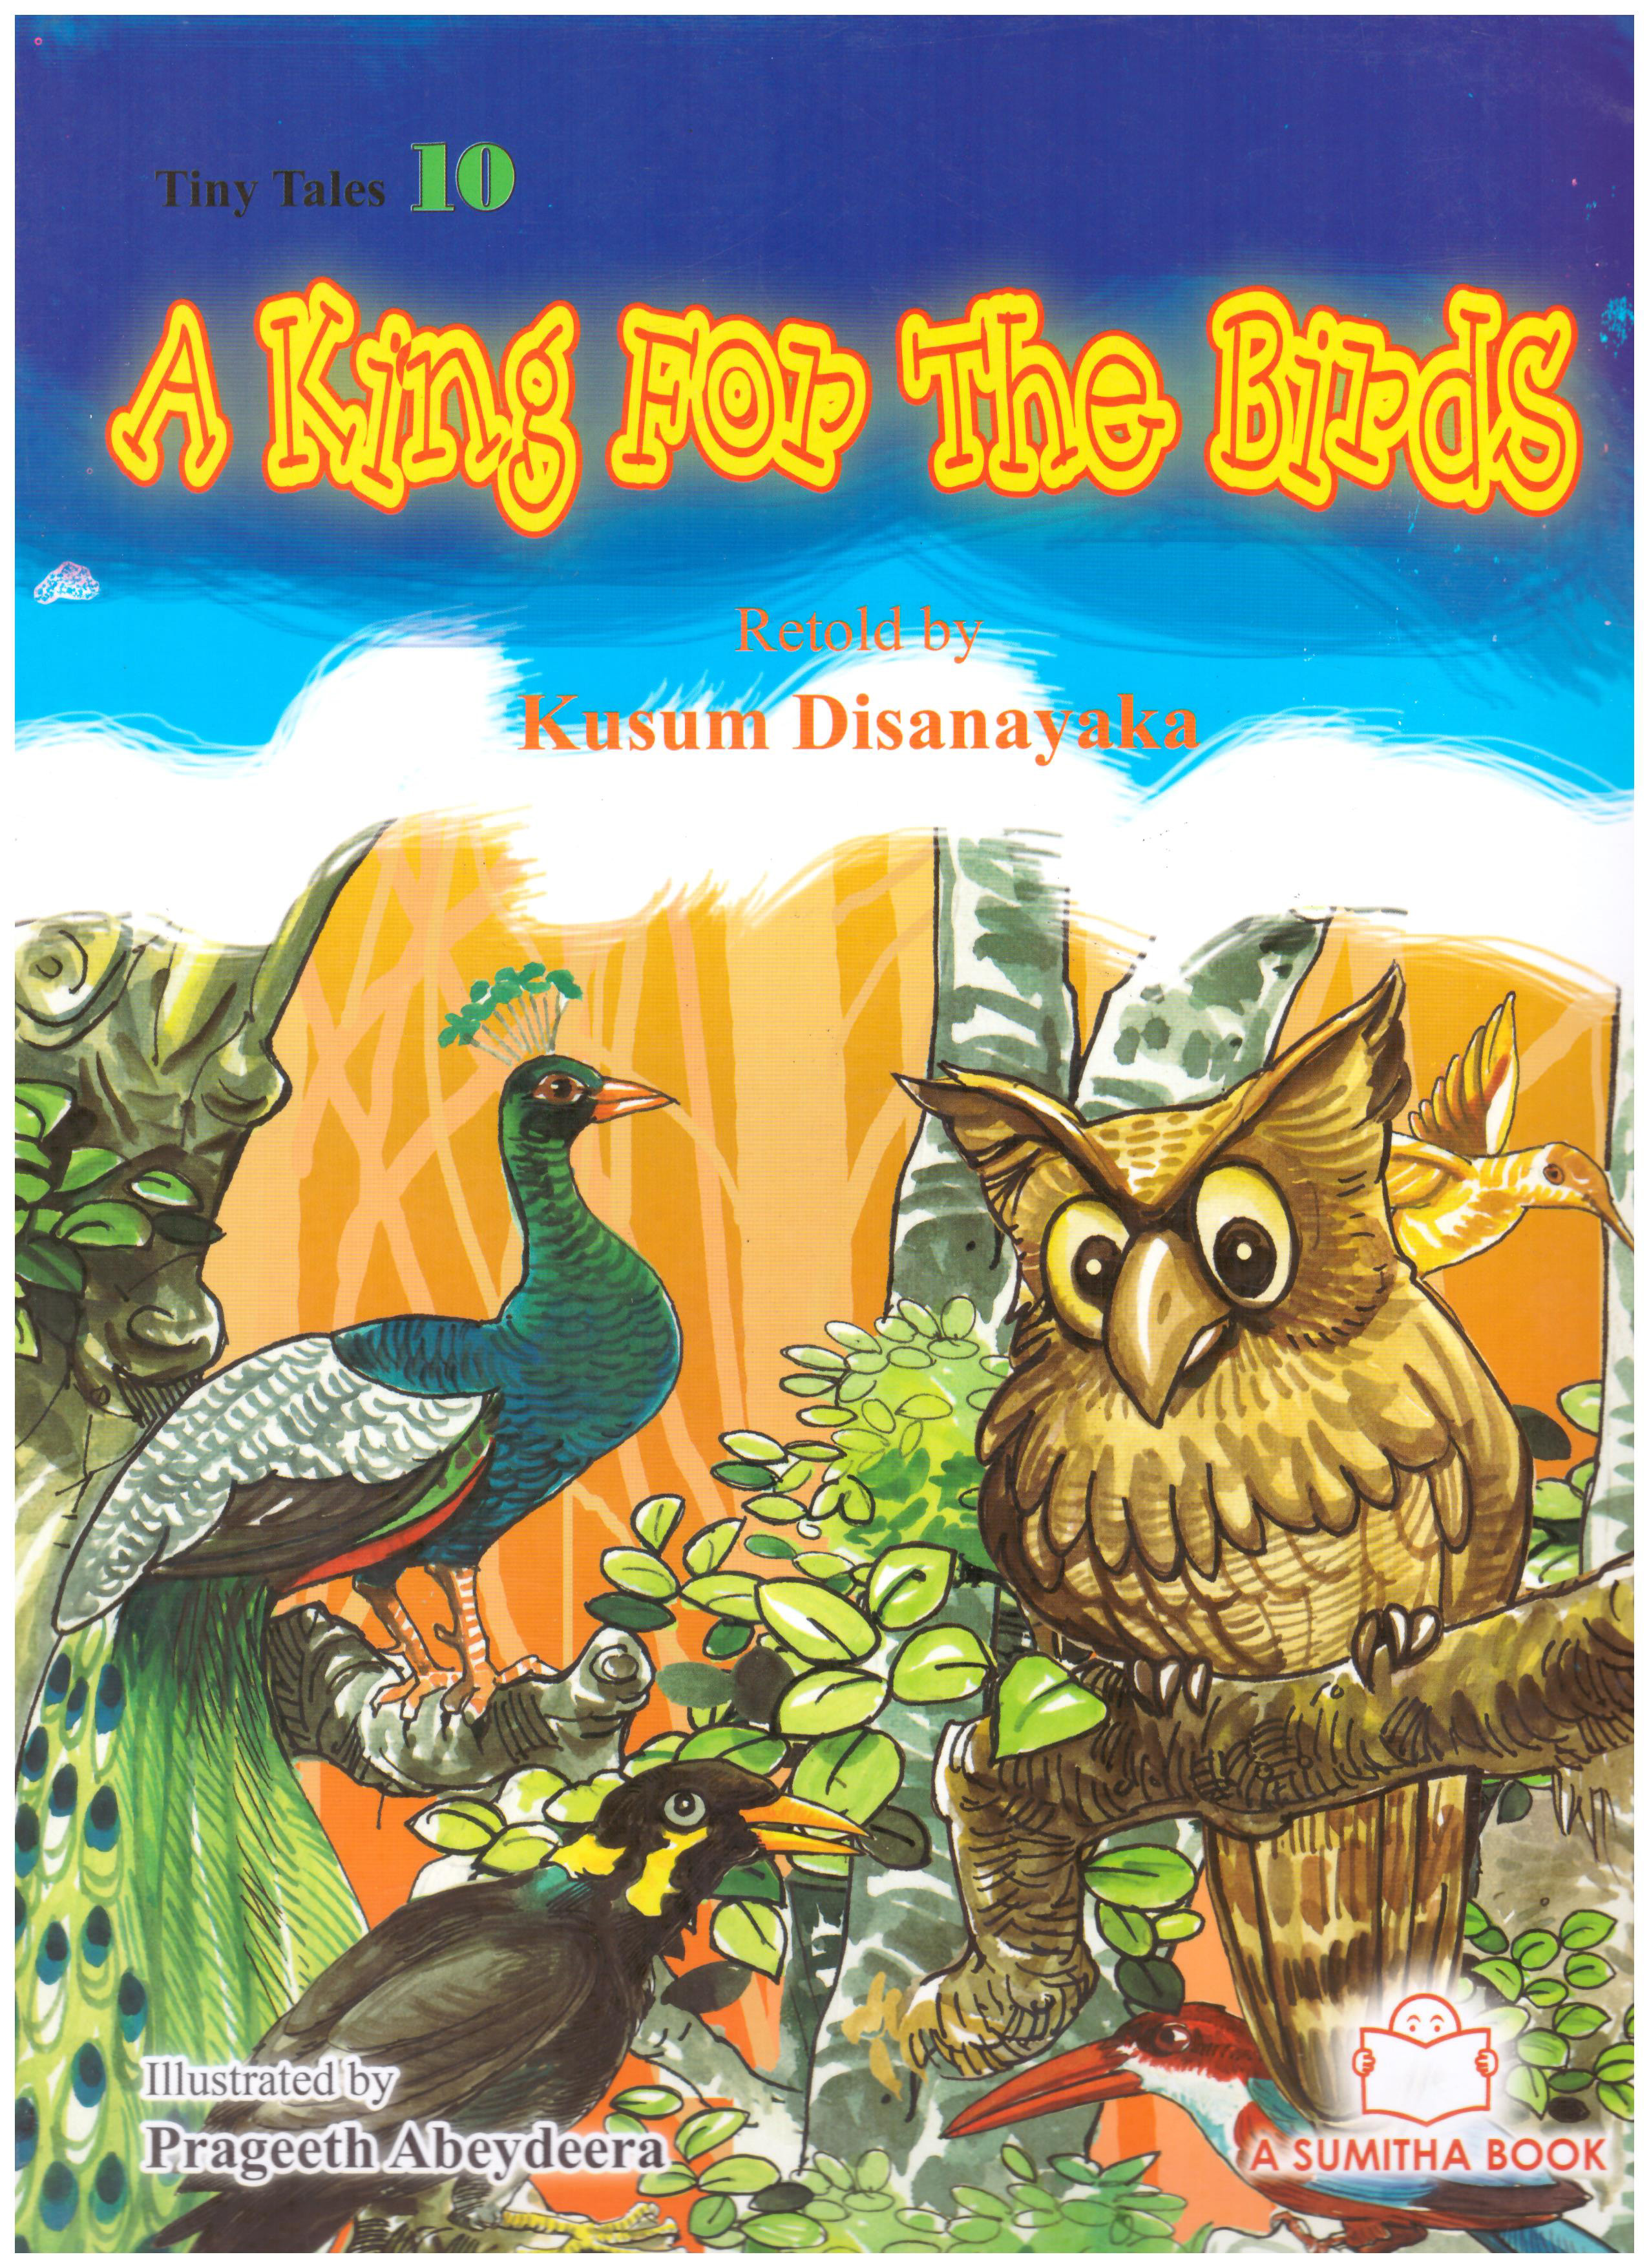 Tiny Tales 10 - A King For The Birds